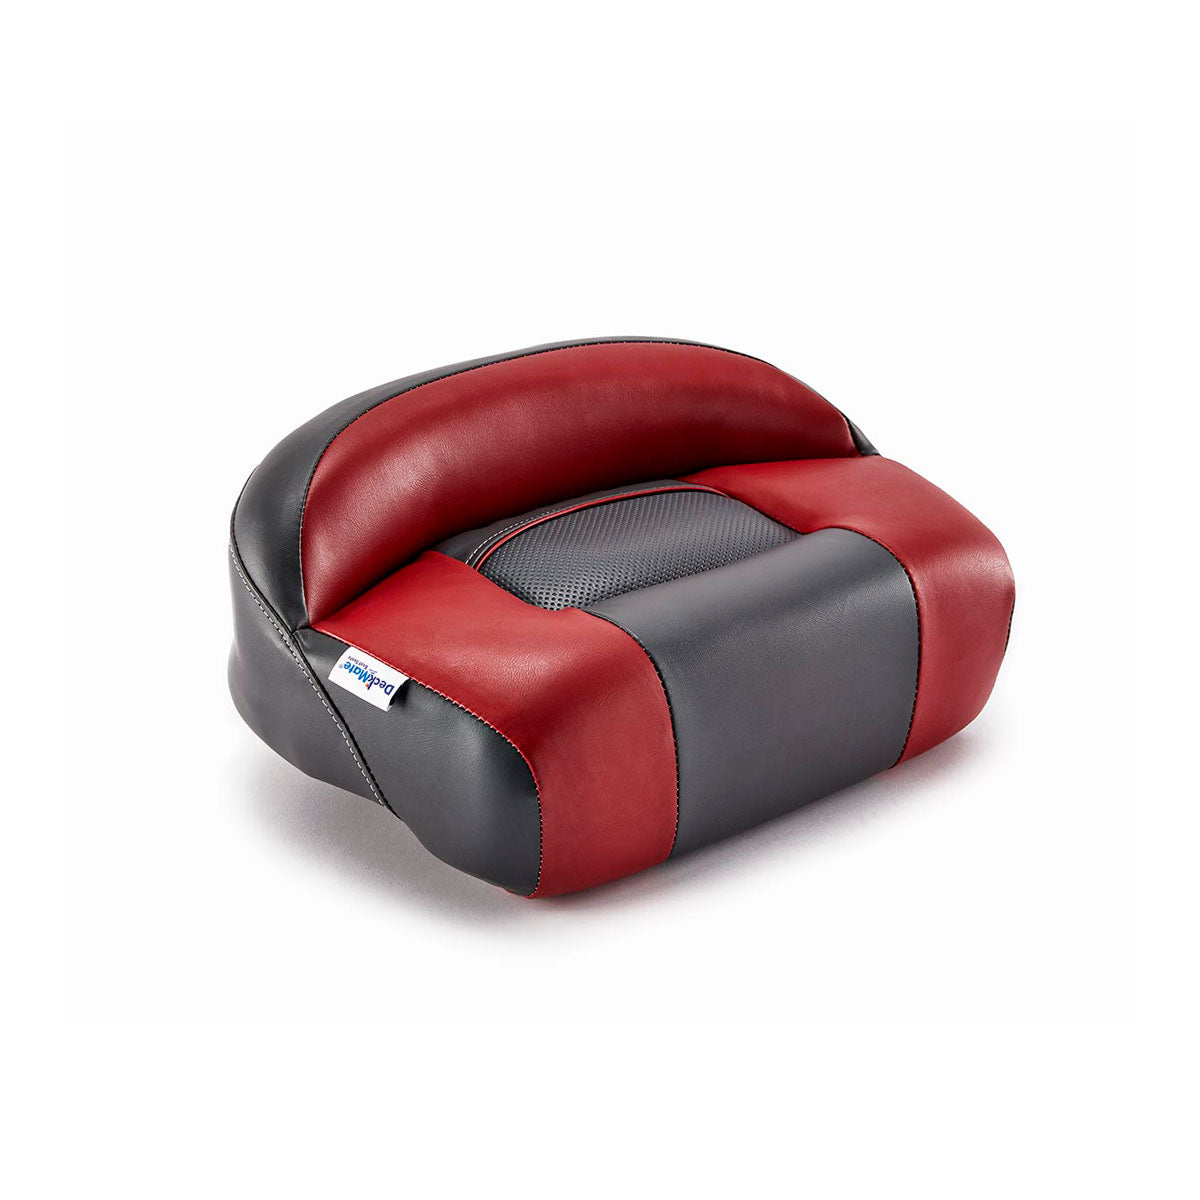 DeckMate Lean Pro Fishing Seat (Charcoal and Red)